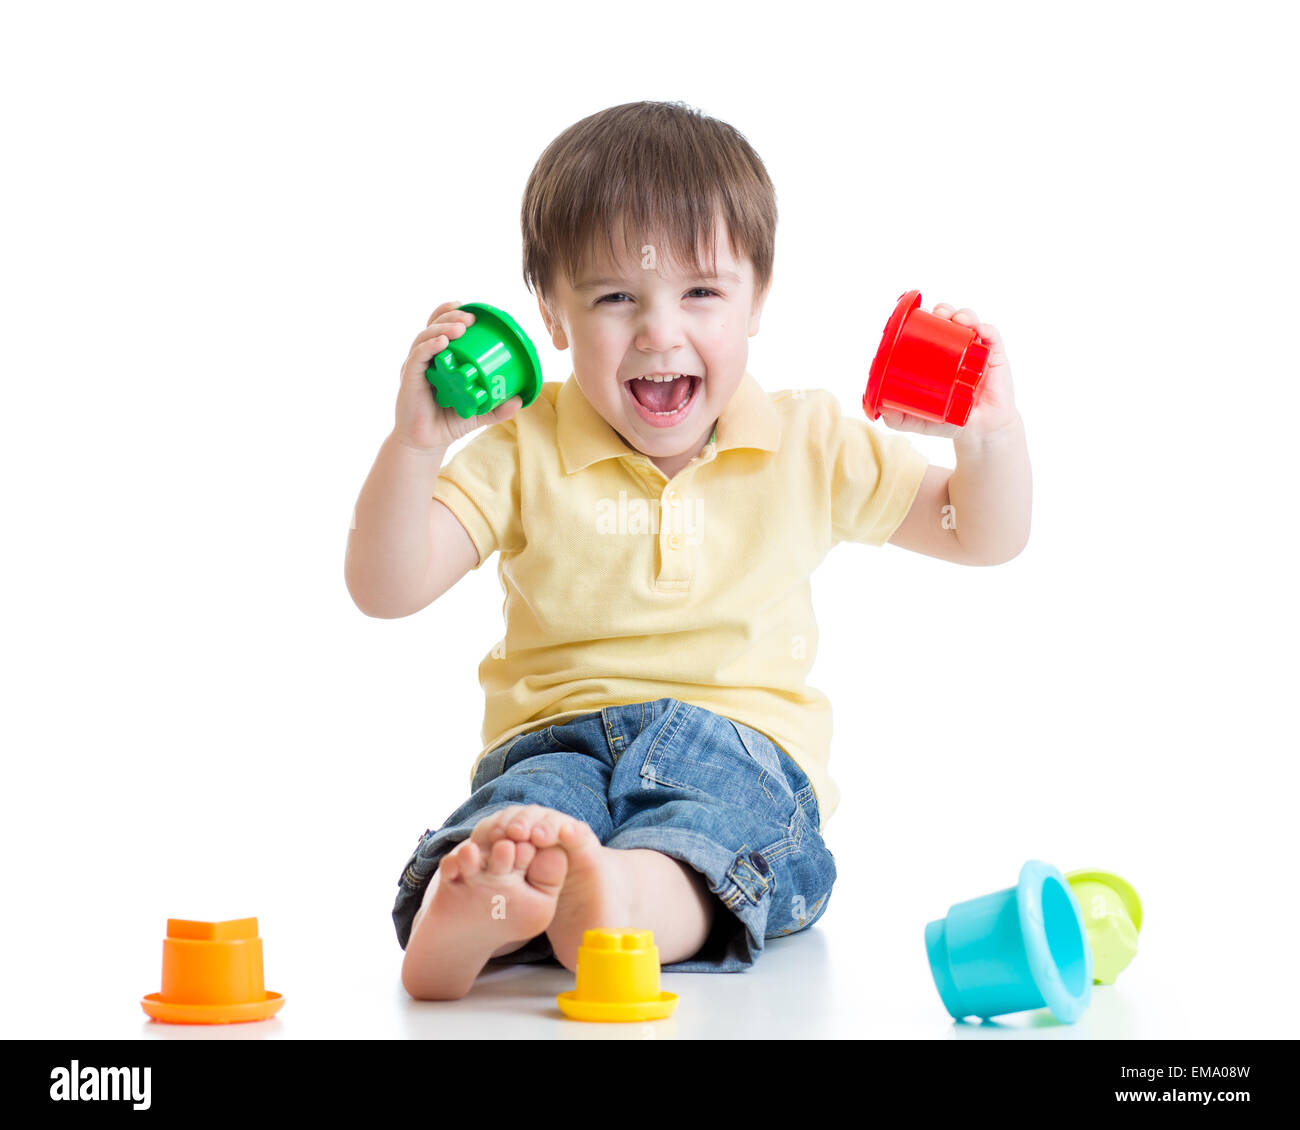 kid playing with color toys Stock Photo